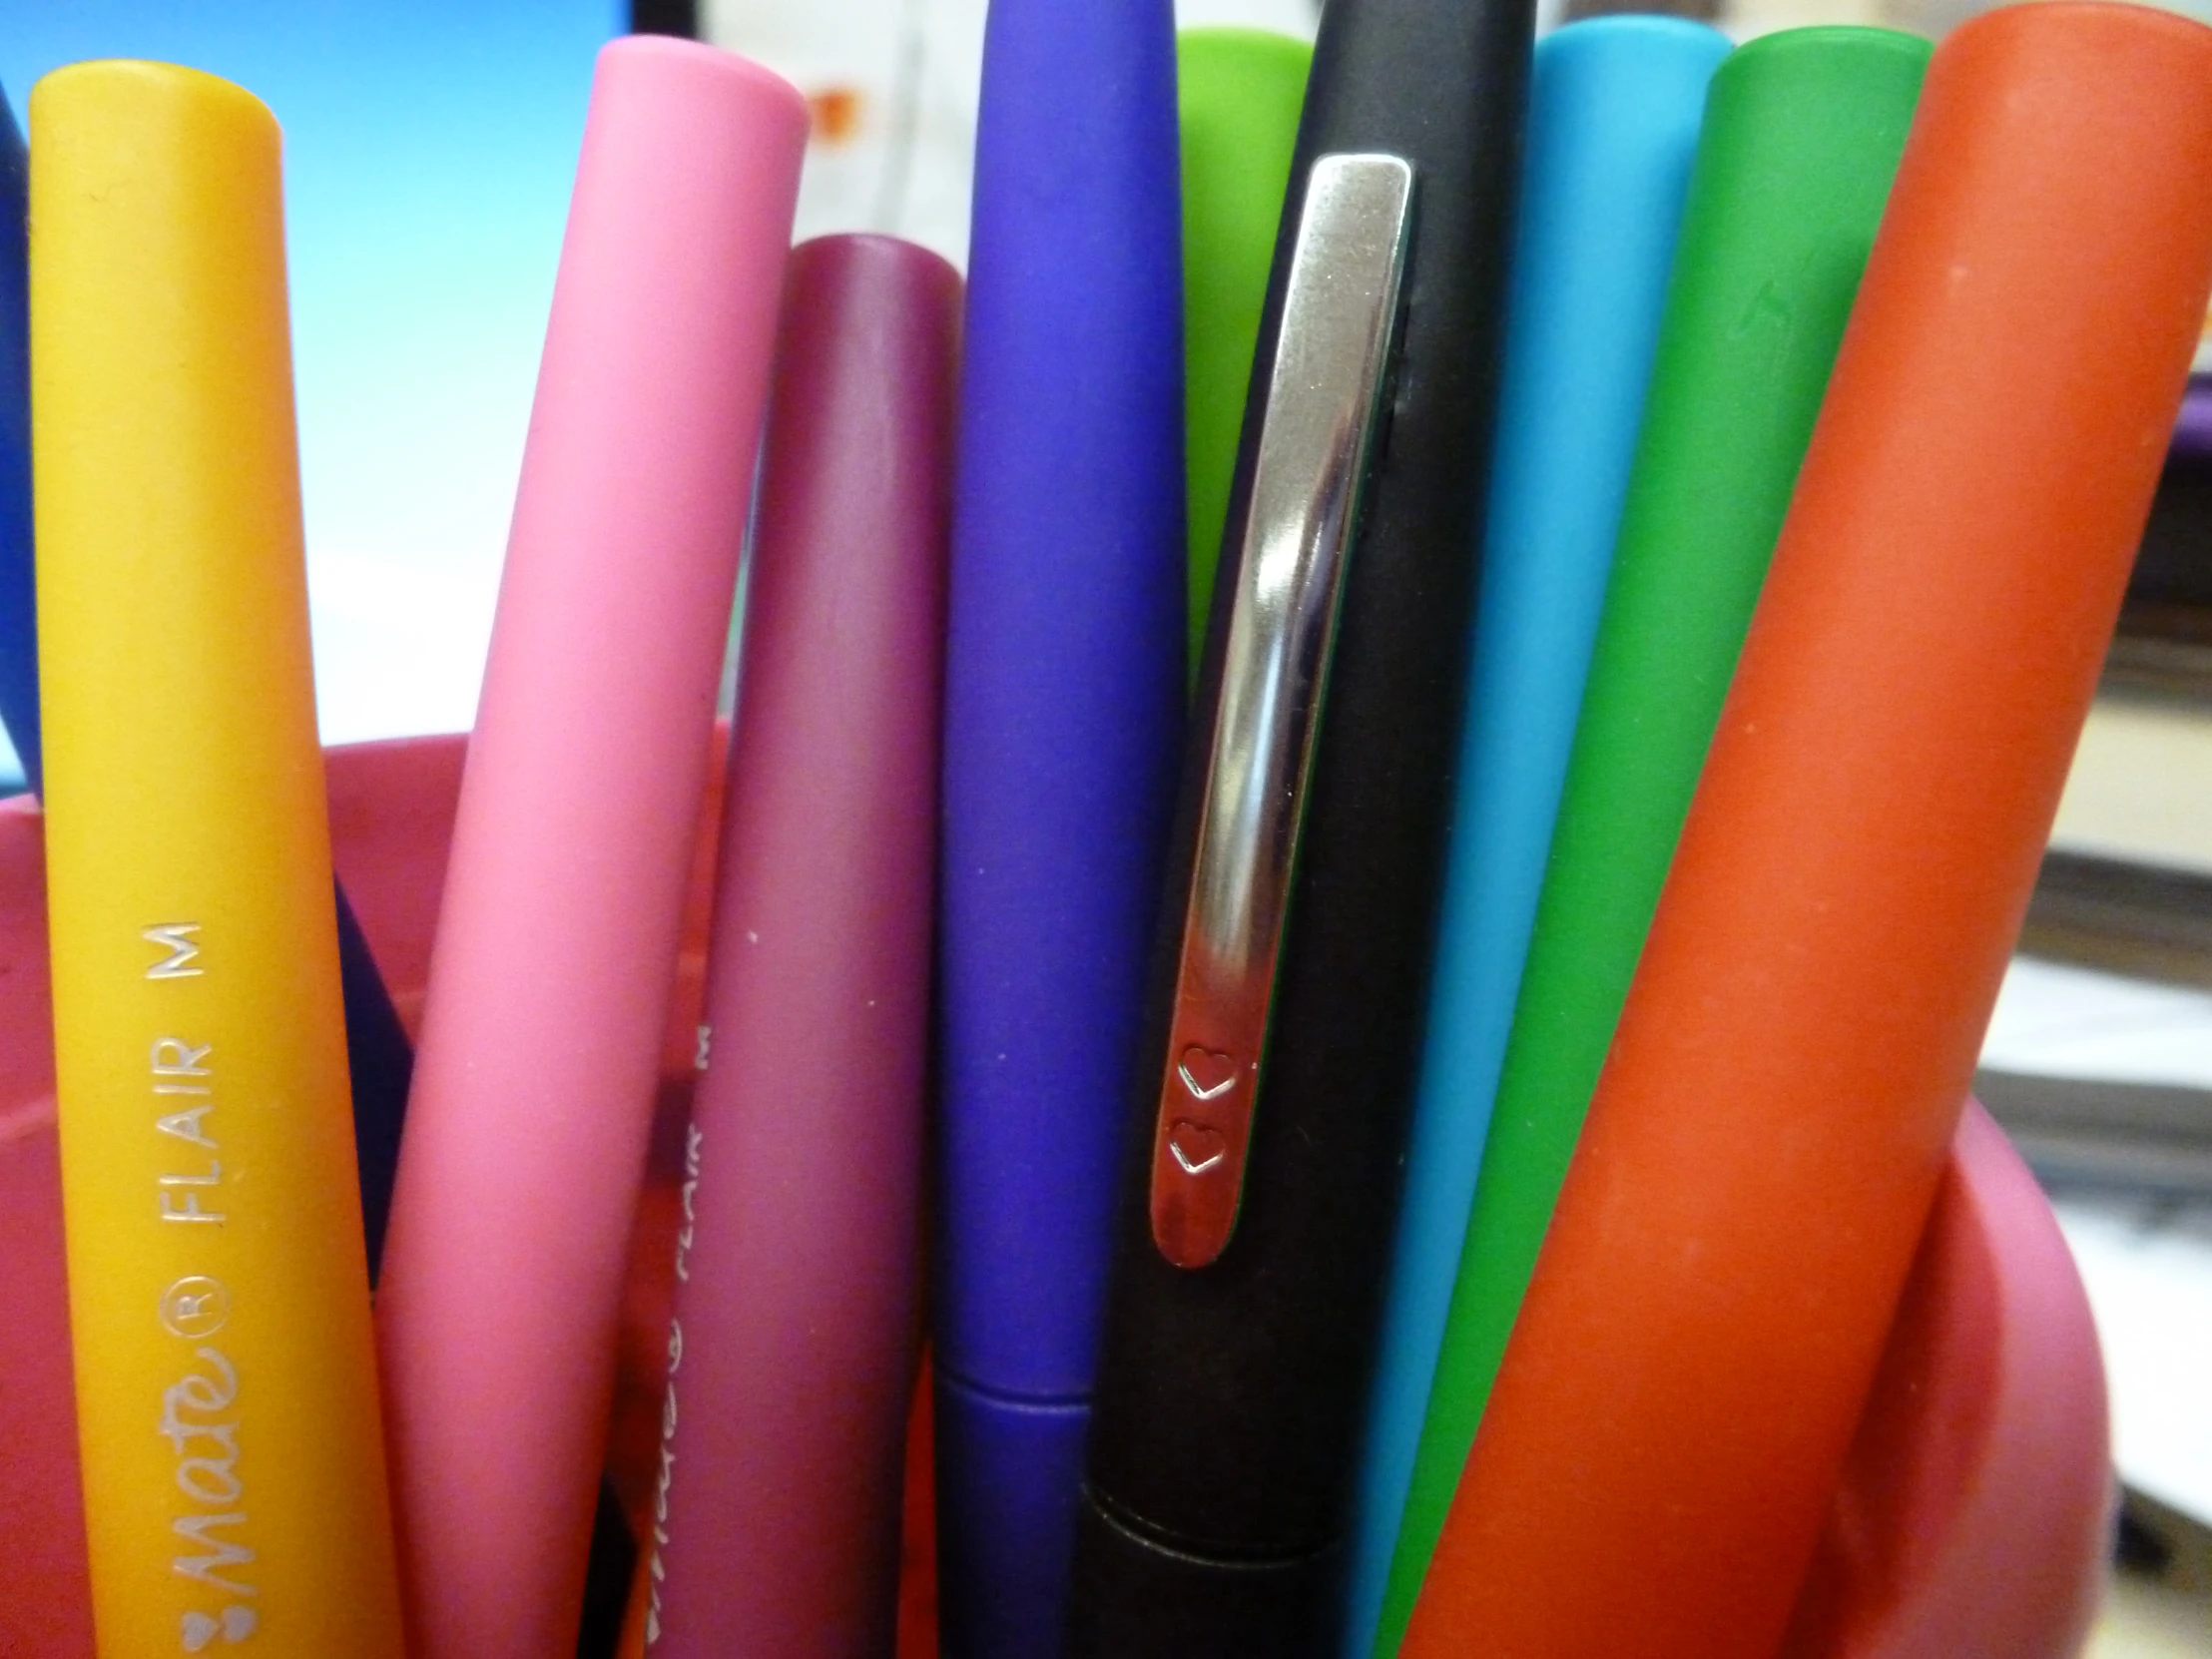 pens, including pink, orange, yellow, green, red, and purple in a cup